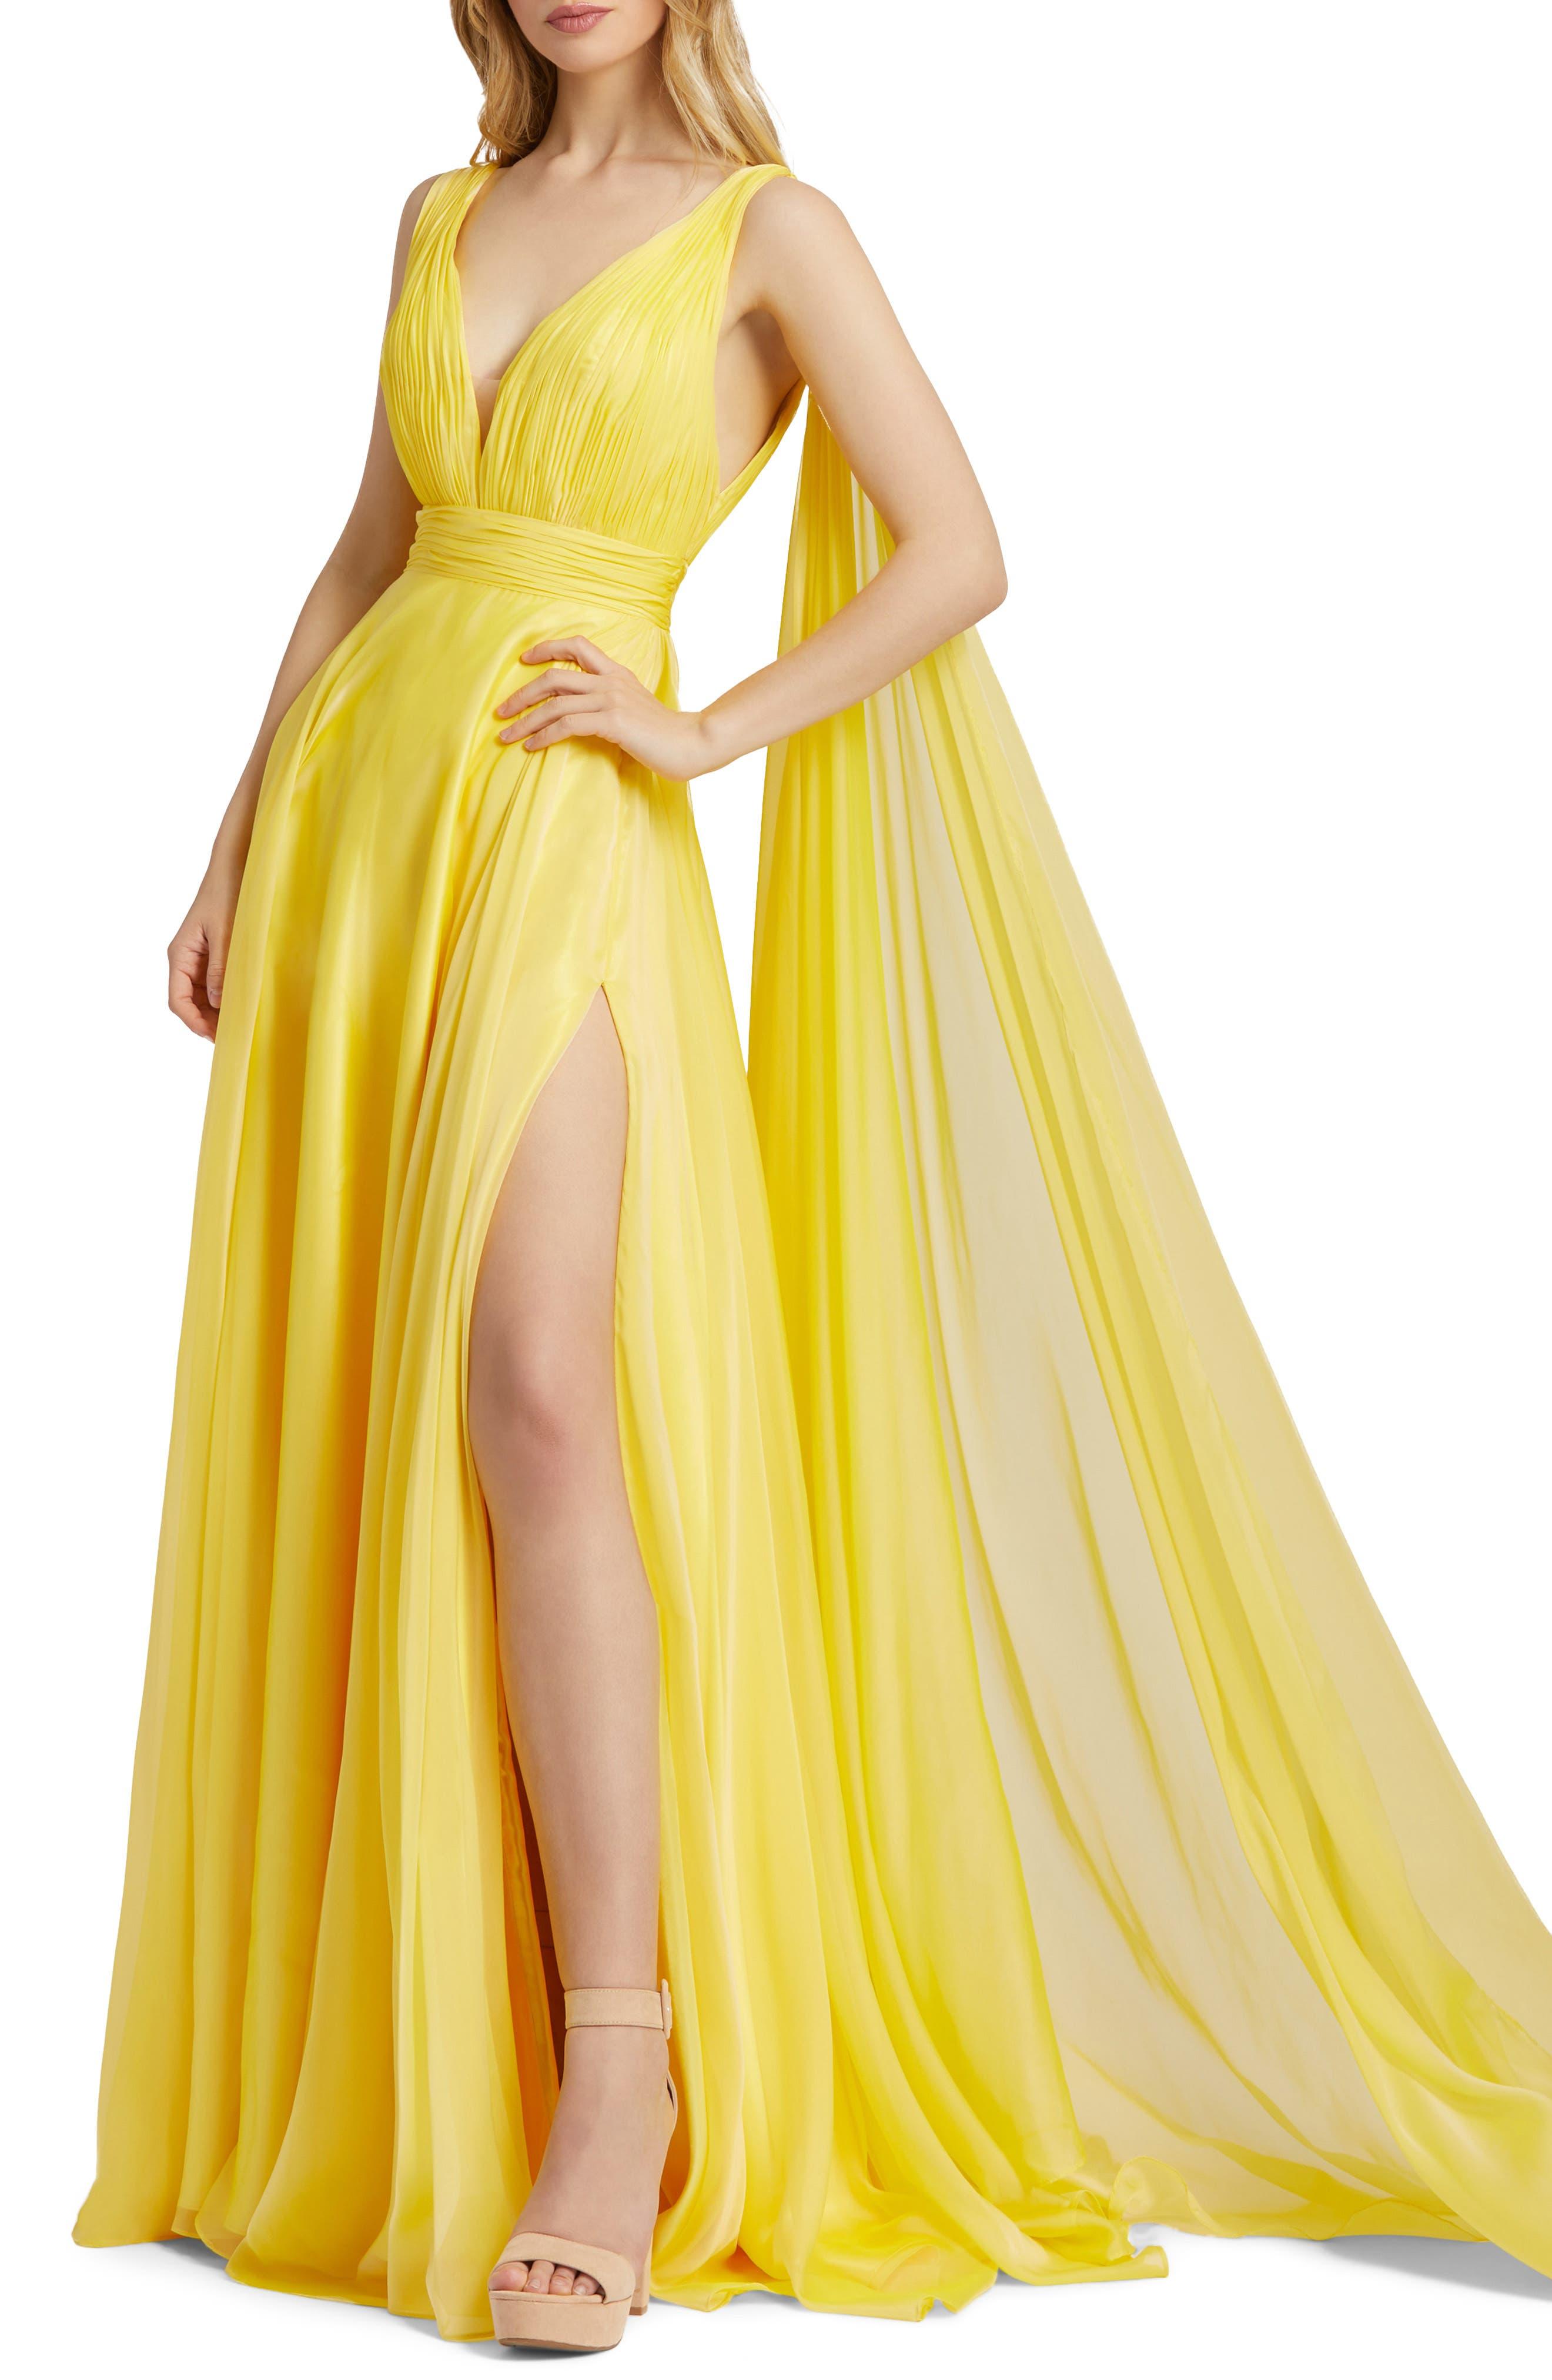 Elinor Simmons for Malcolm Starr-Yellow Beaded Chiffon Gown - Ruby Lane